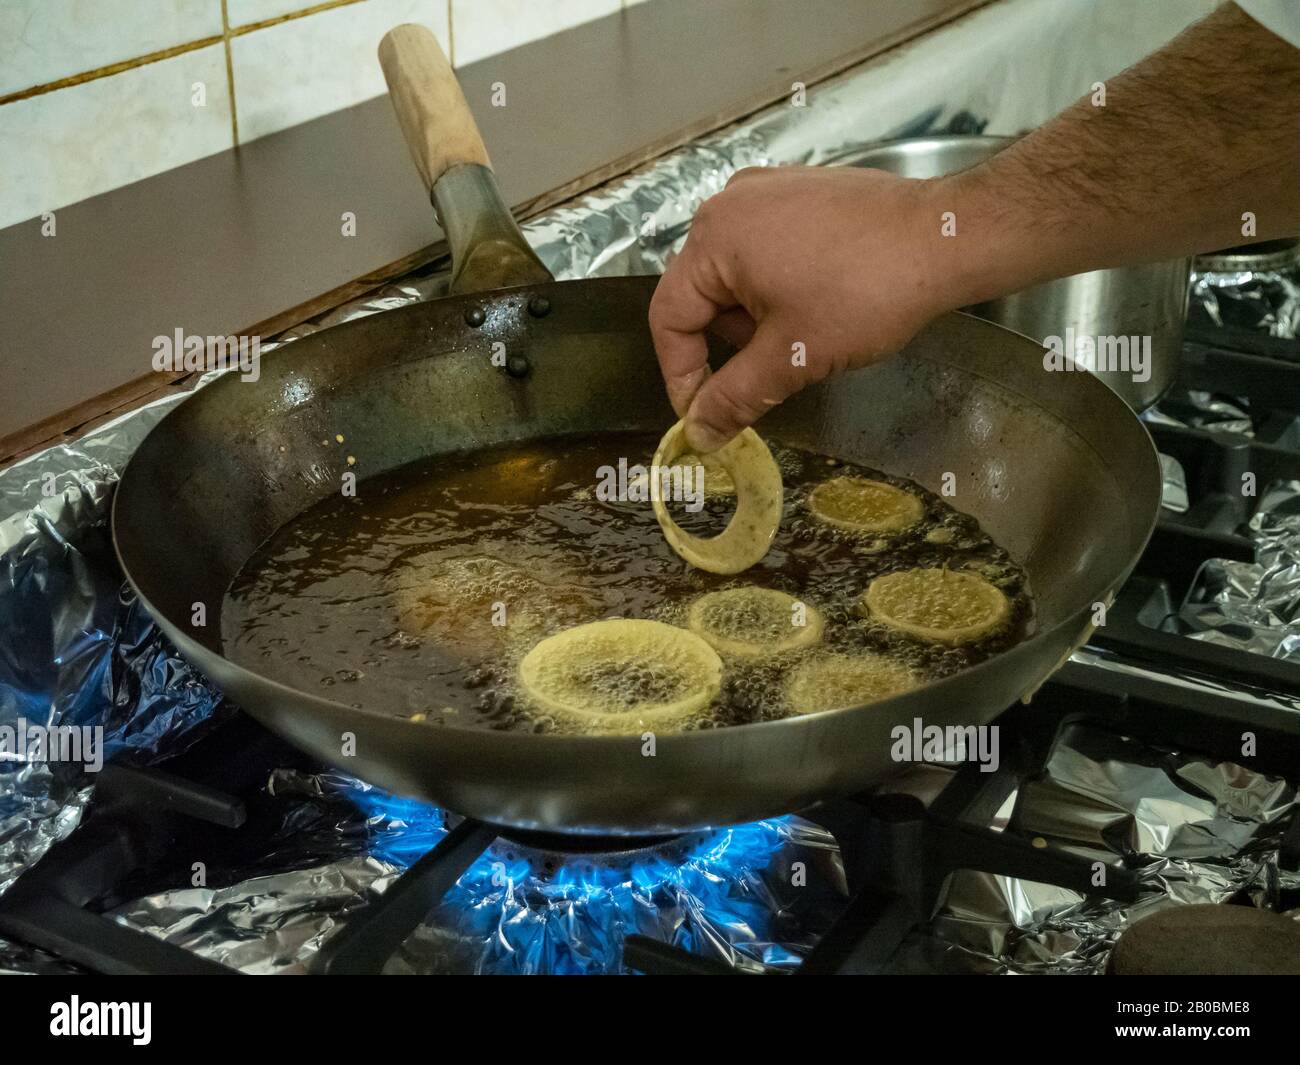 https://c8.alamy.com/comp/2B0BME8/a-chef-deep-fries-indian-pakora-onion-rings-in-hot-oil-over-a-gas-stove-in-a-restaurant-kitchen-2B0BME8.jpg